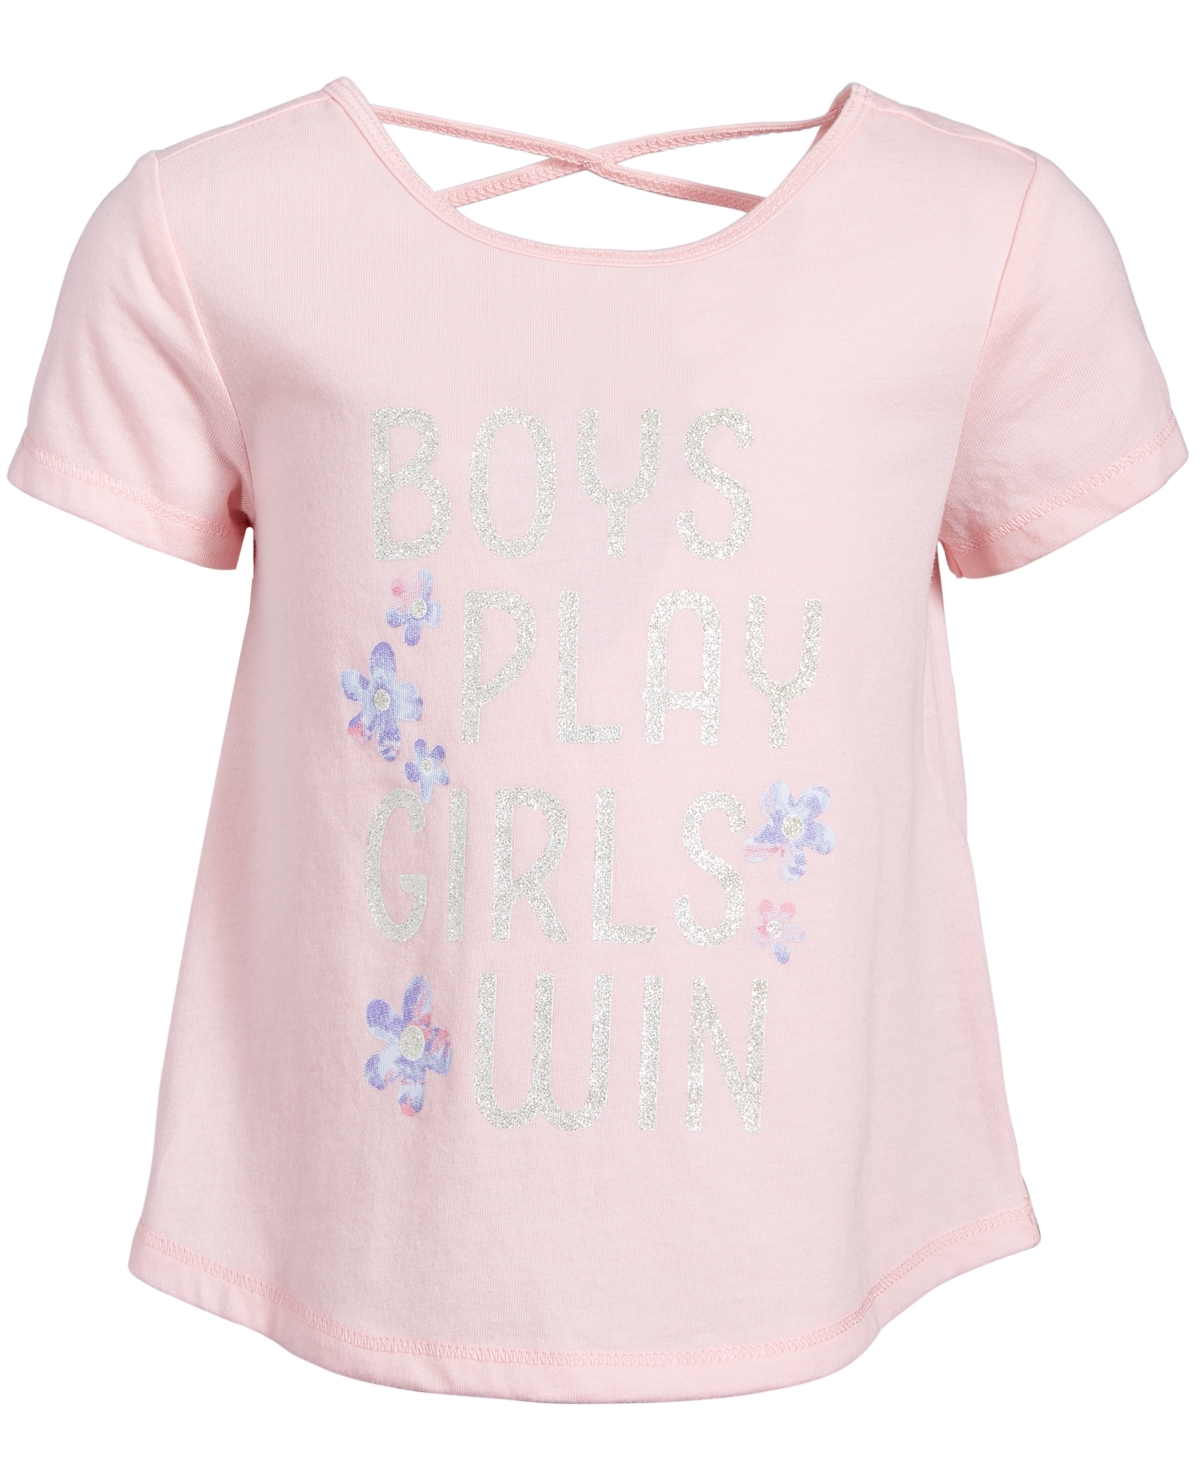 Ideology Toddler Girls Girls Win Top, Created for Macy's